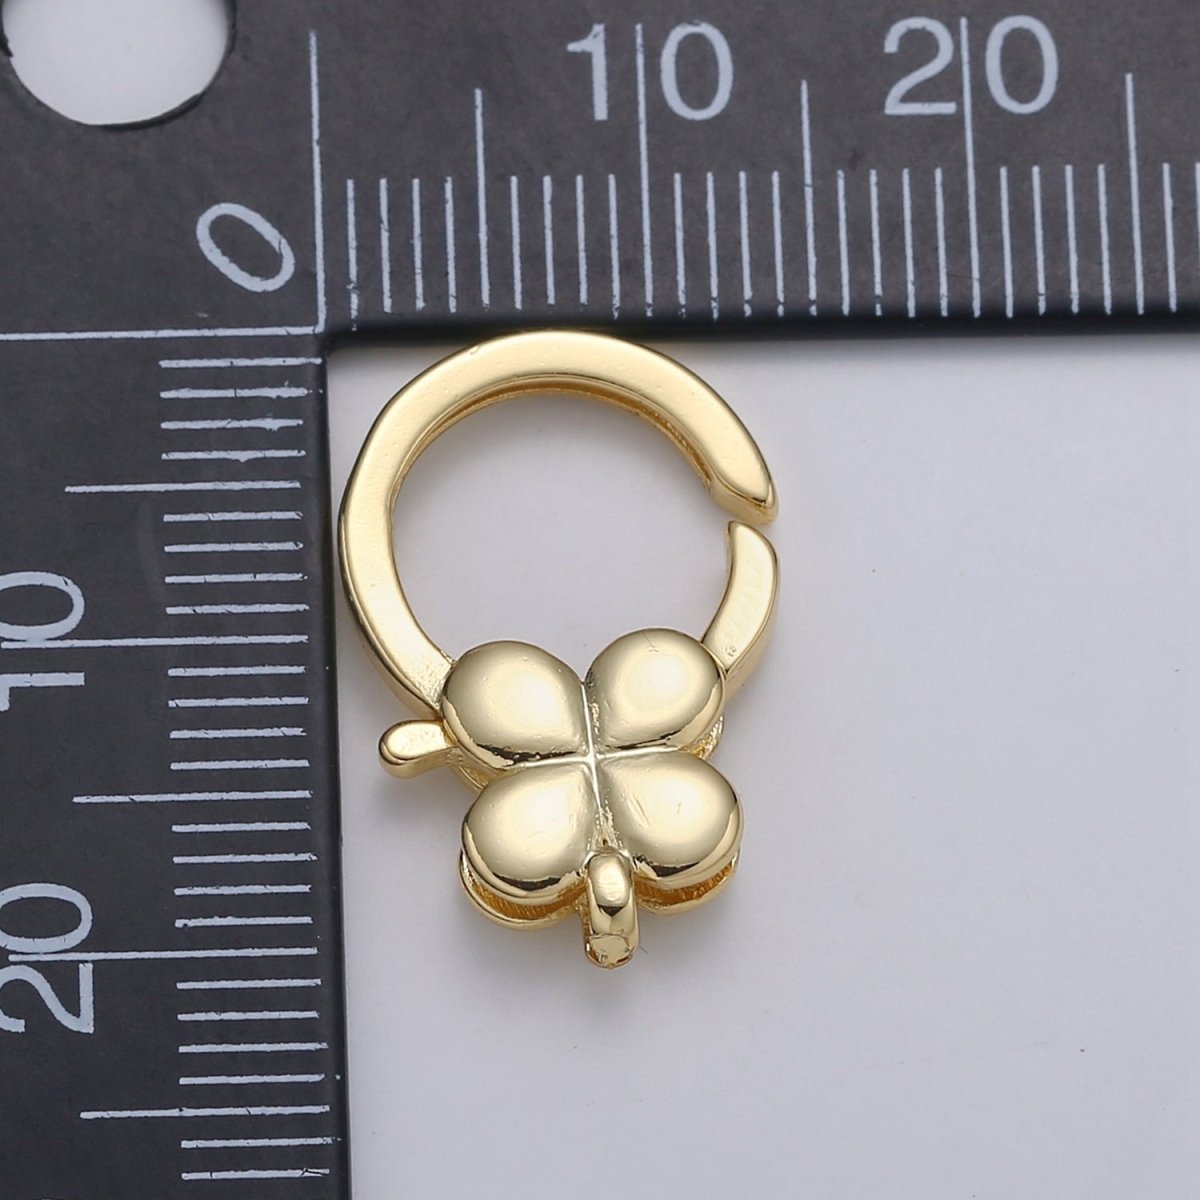 Wholesale Lobster Clasp 24k Gold , Clover Lobster Claw for Jewelry Making, Size 19.9mmX13.8mm L-182 - DLUXCA